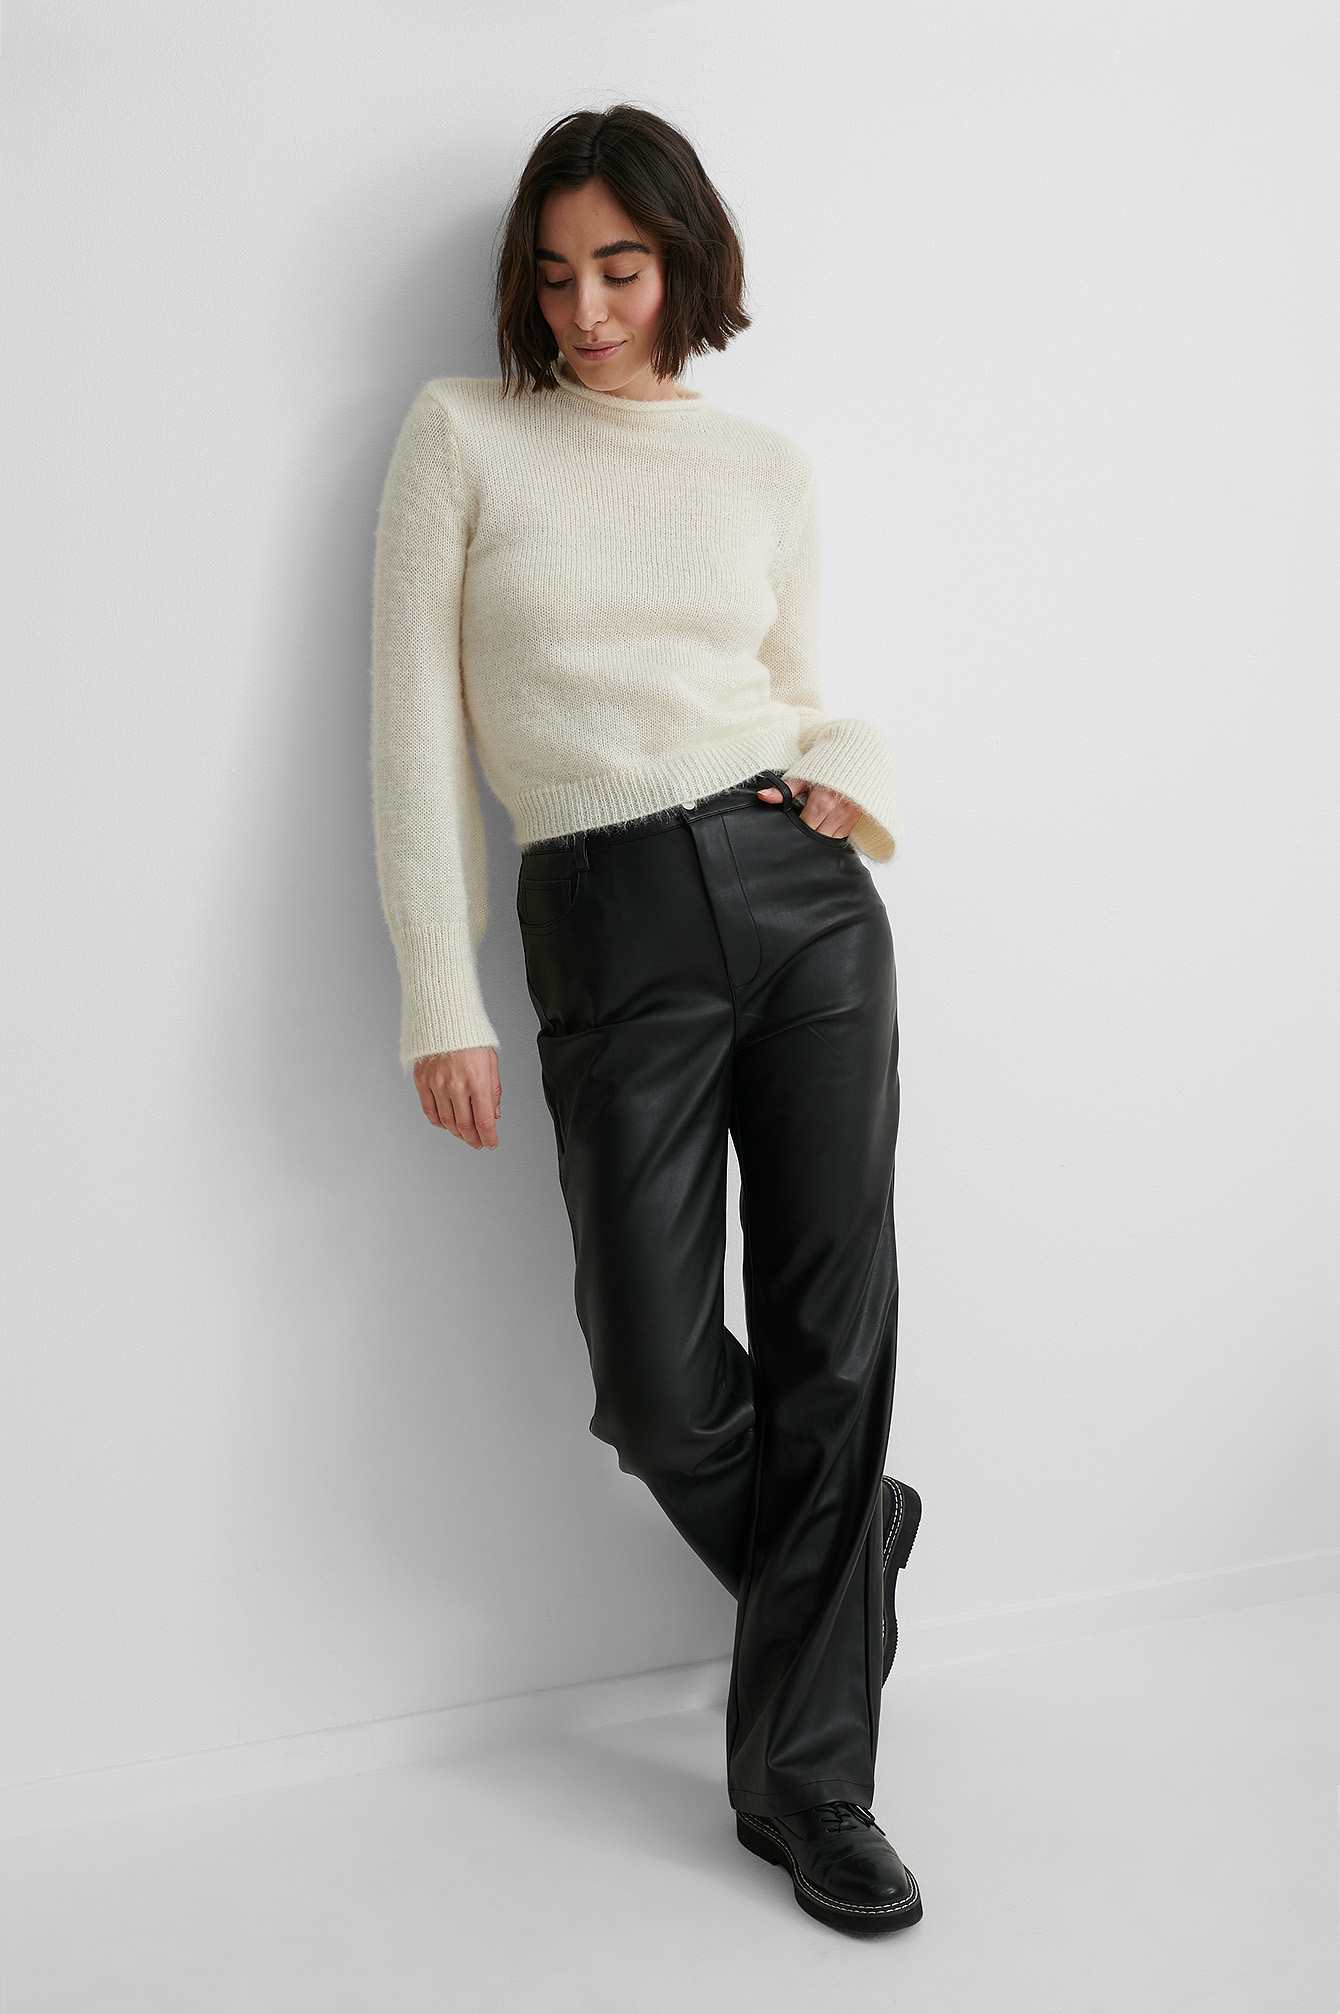 Hairy Knit Sweater with PU-Pants and Boots.